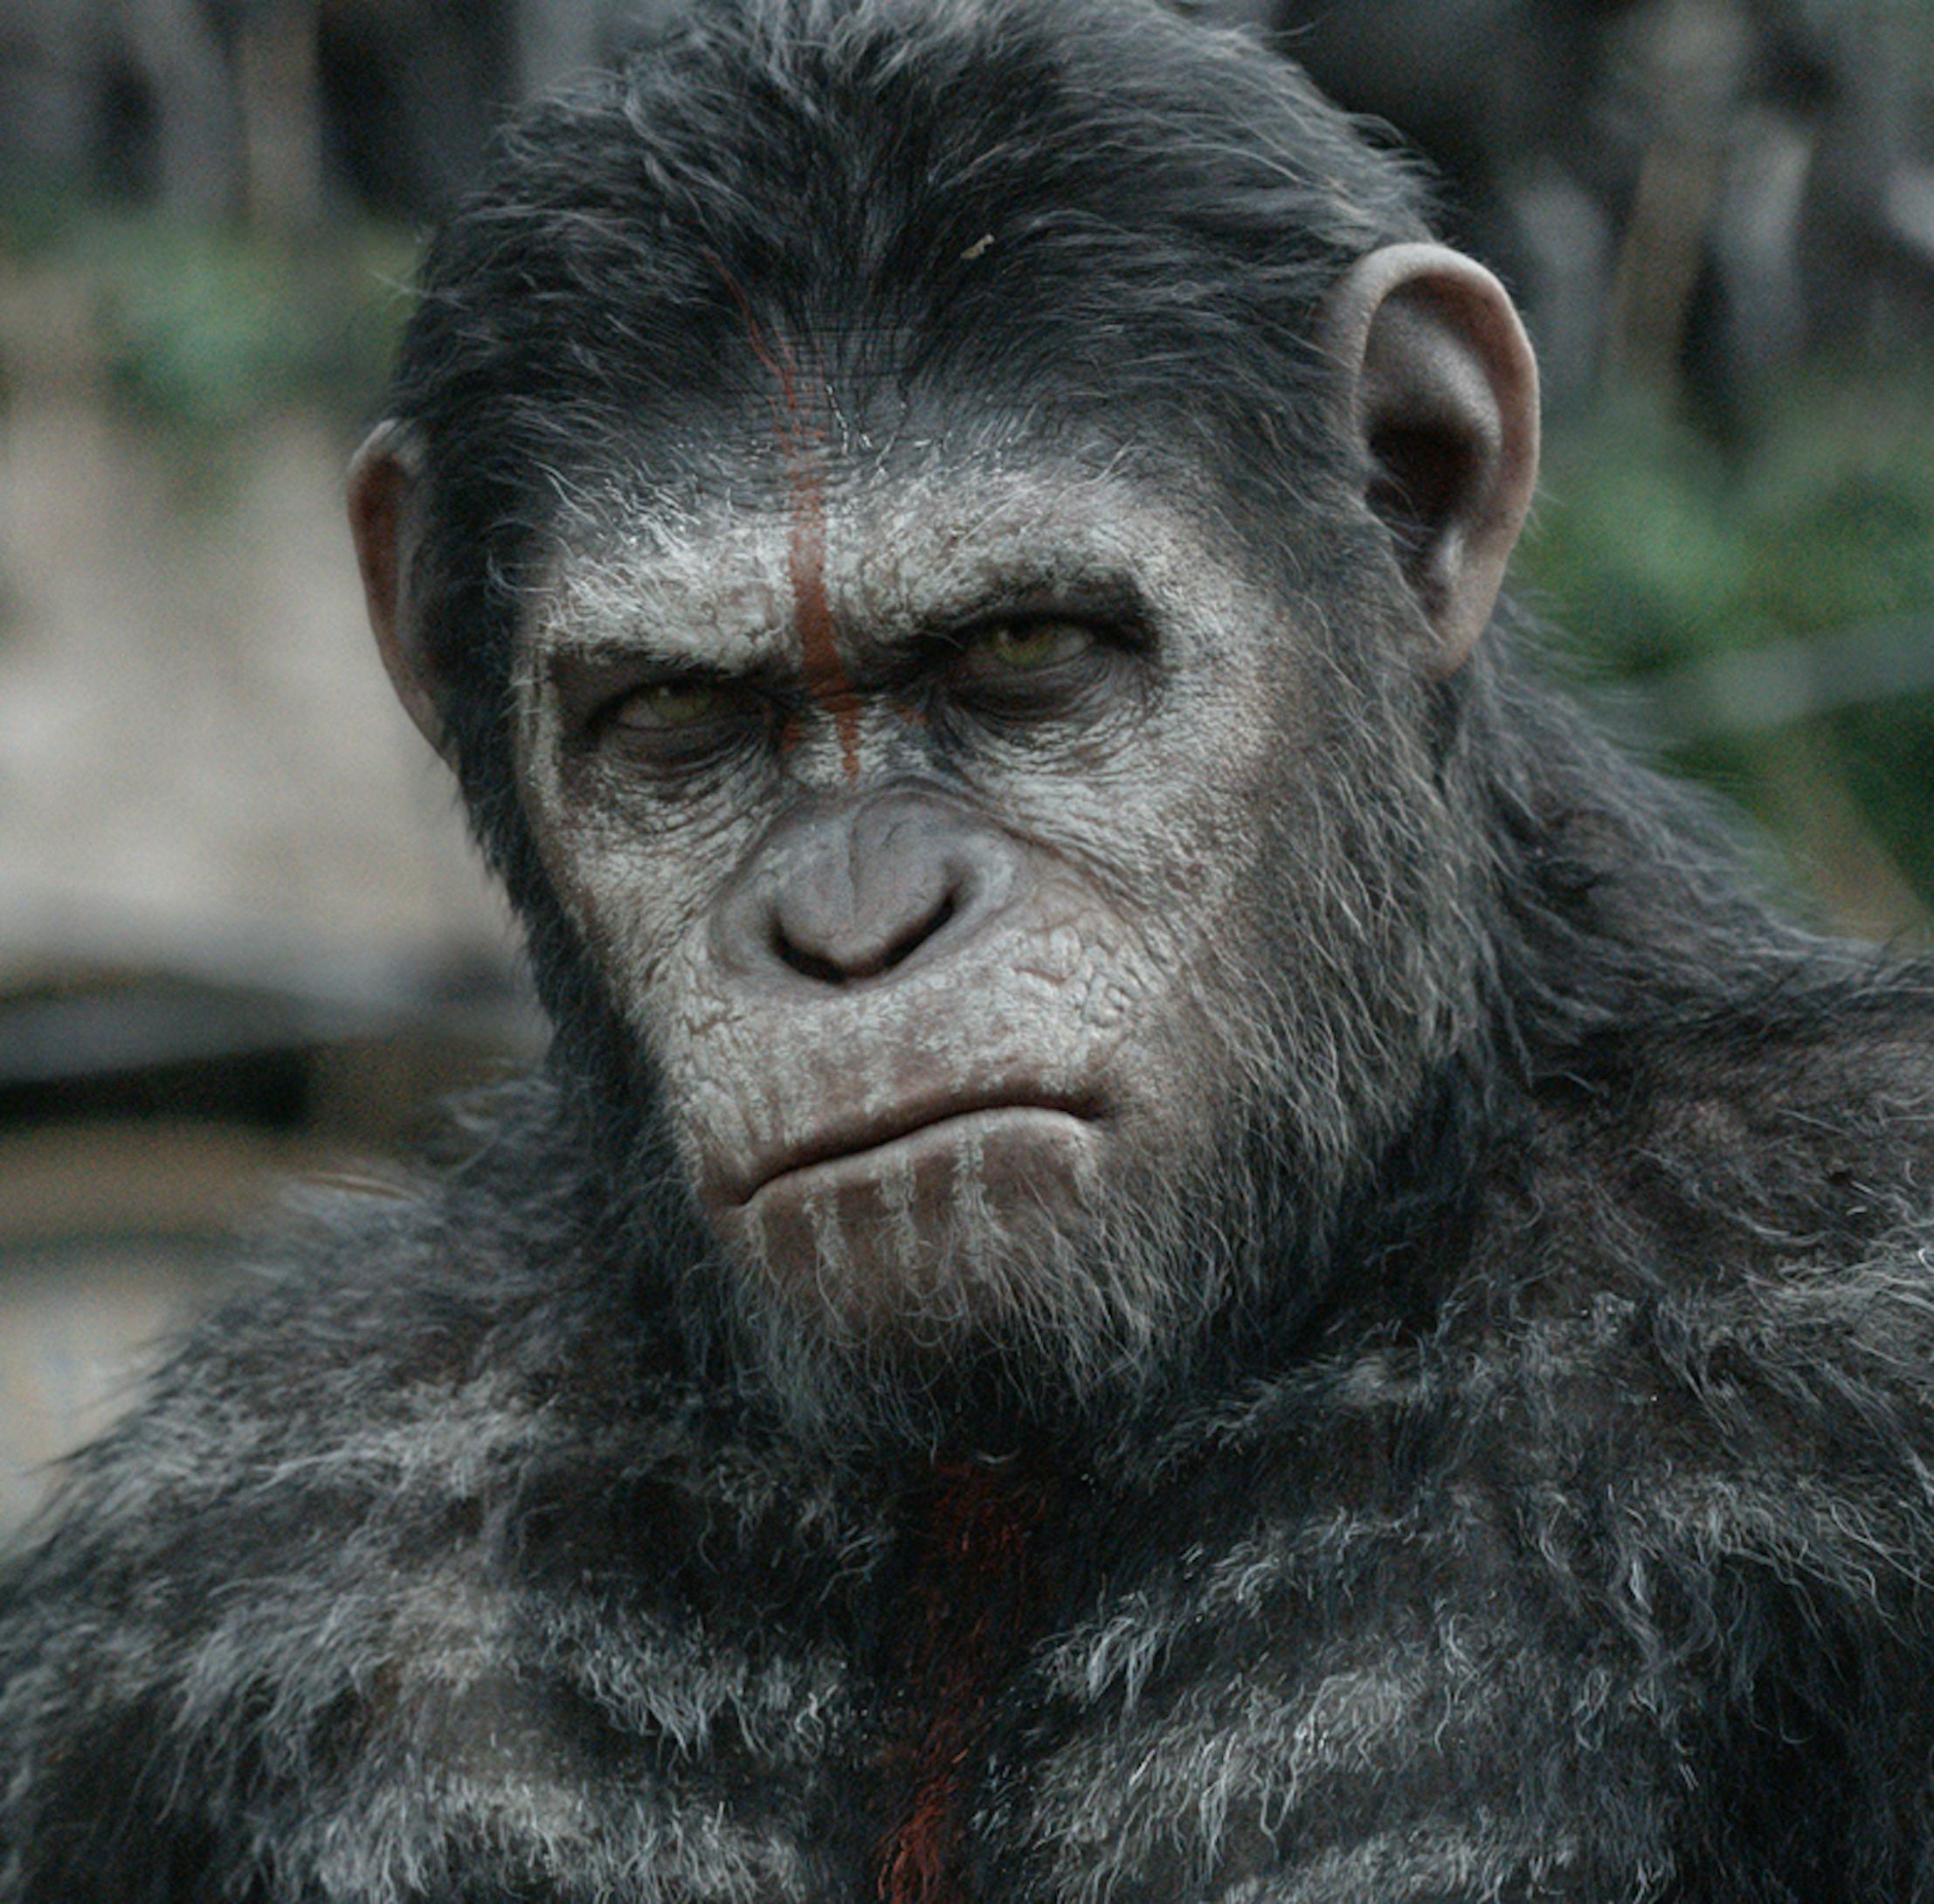 of the Apes' was the bravest blockbuster of the decade in one